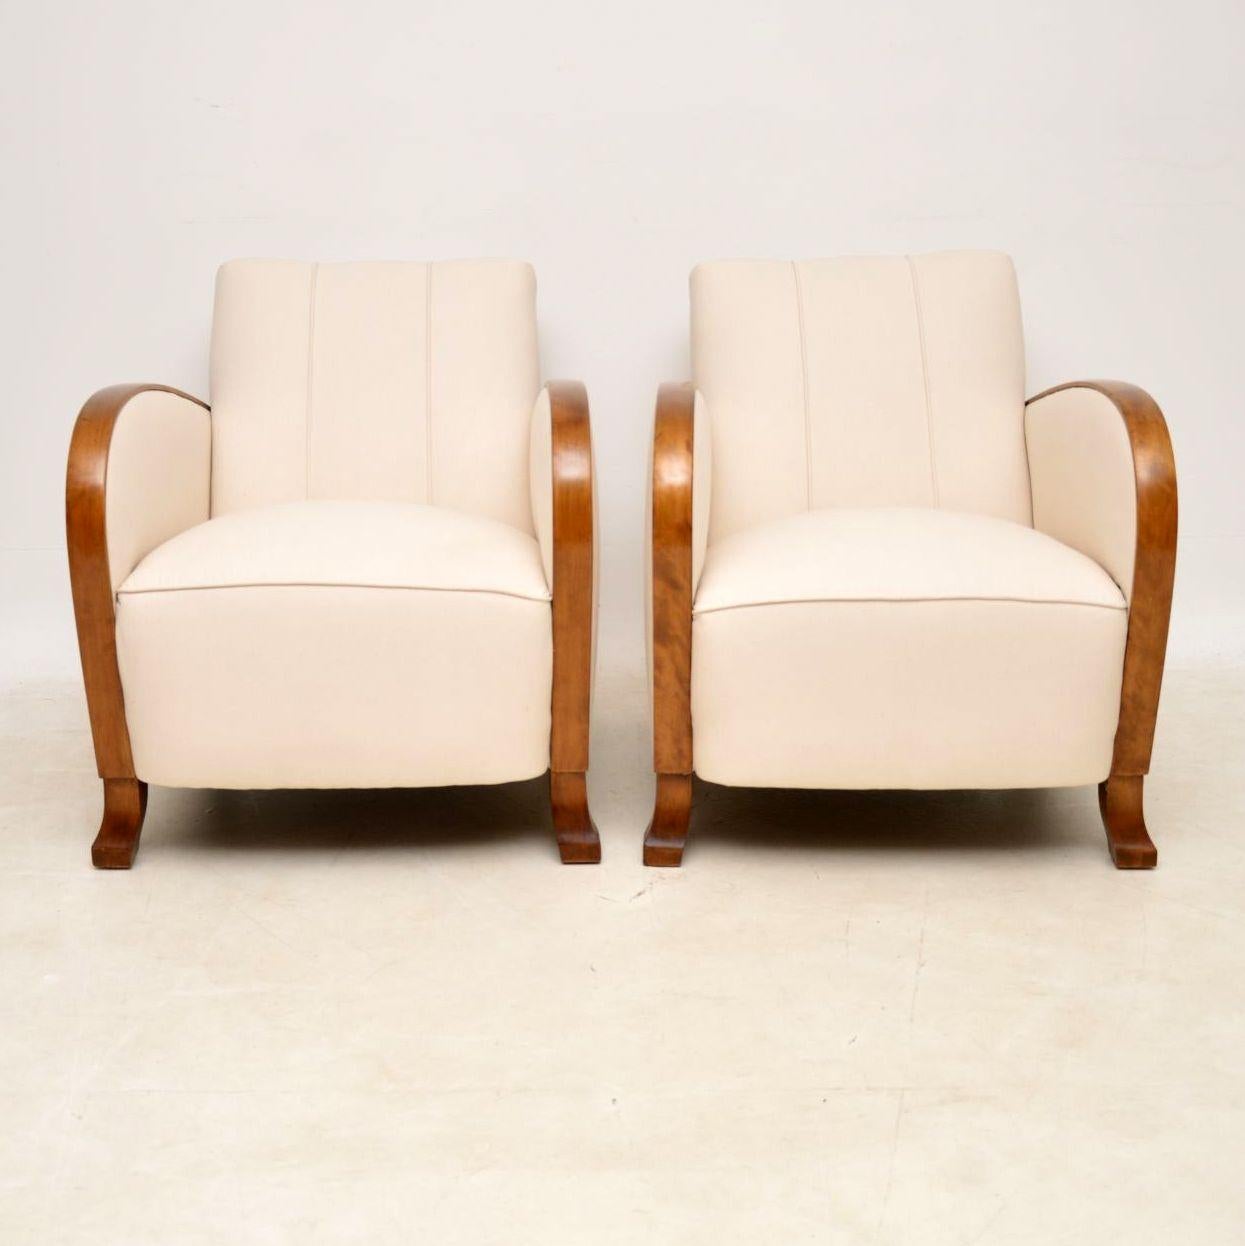 Magnificent pair of original Swedish Art Deco armchairs in excellent condition dating from the 1930s period. They have just come over from Sweden, been polished and re-upholstered in a natural cream linen fabric and in the same design as before.